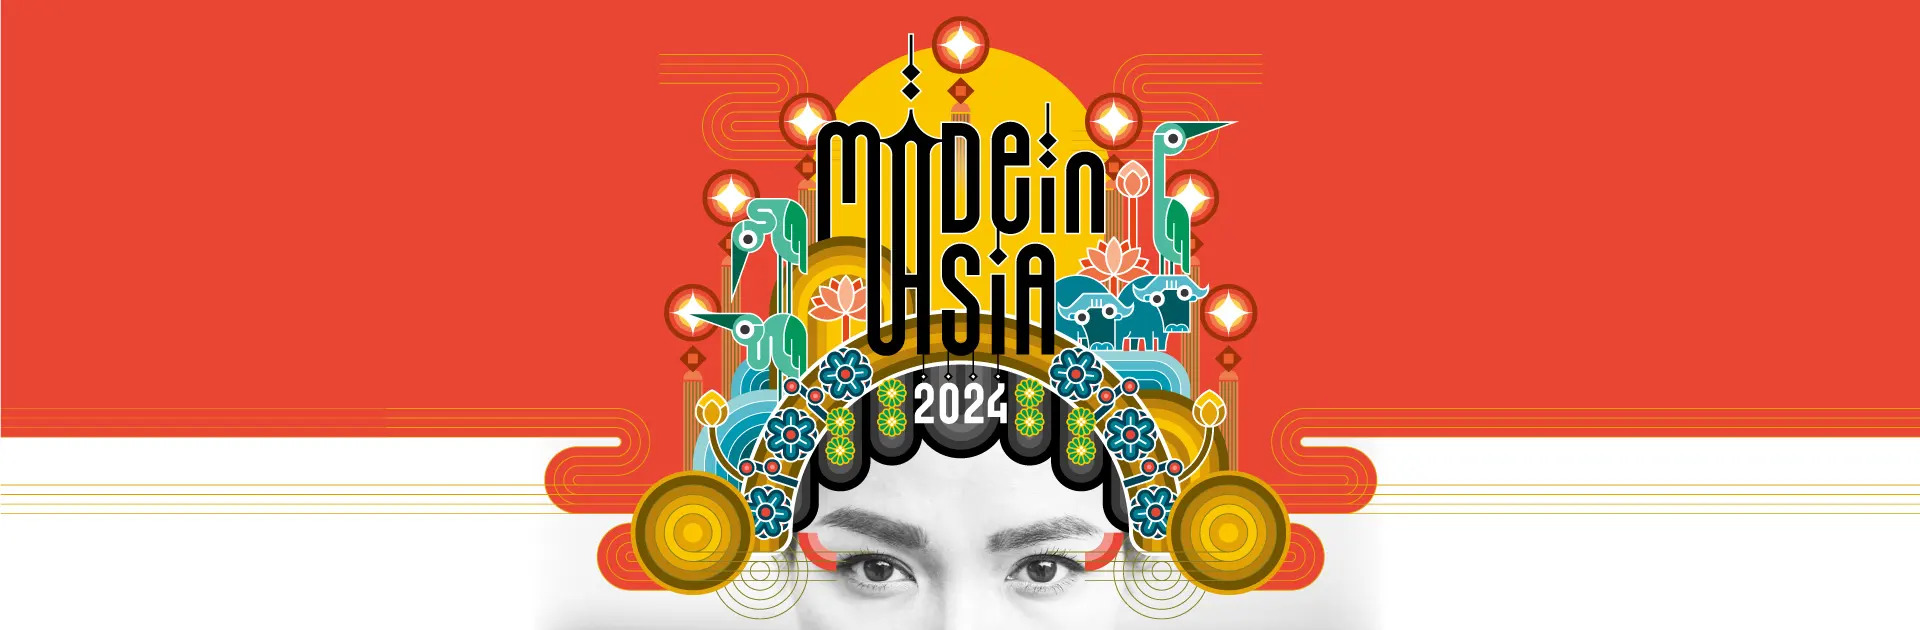 made in asia toulouse 31 mars 2024